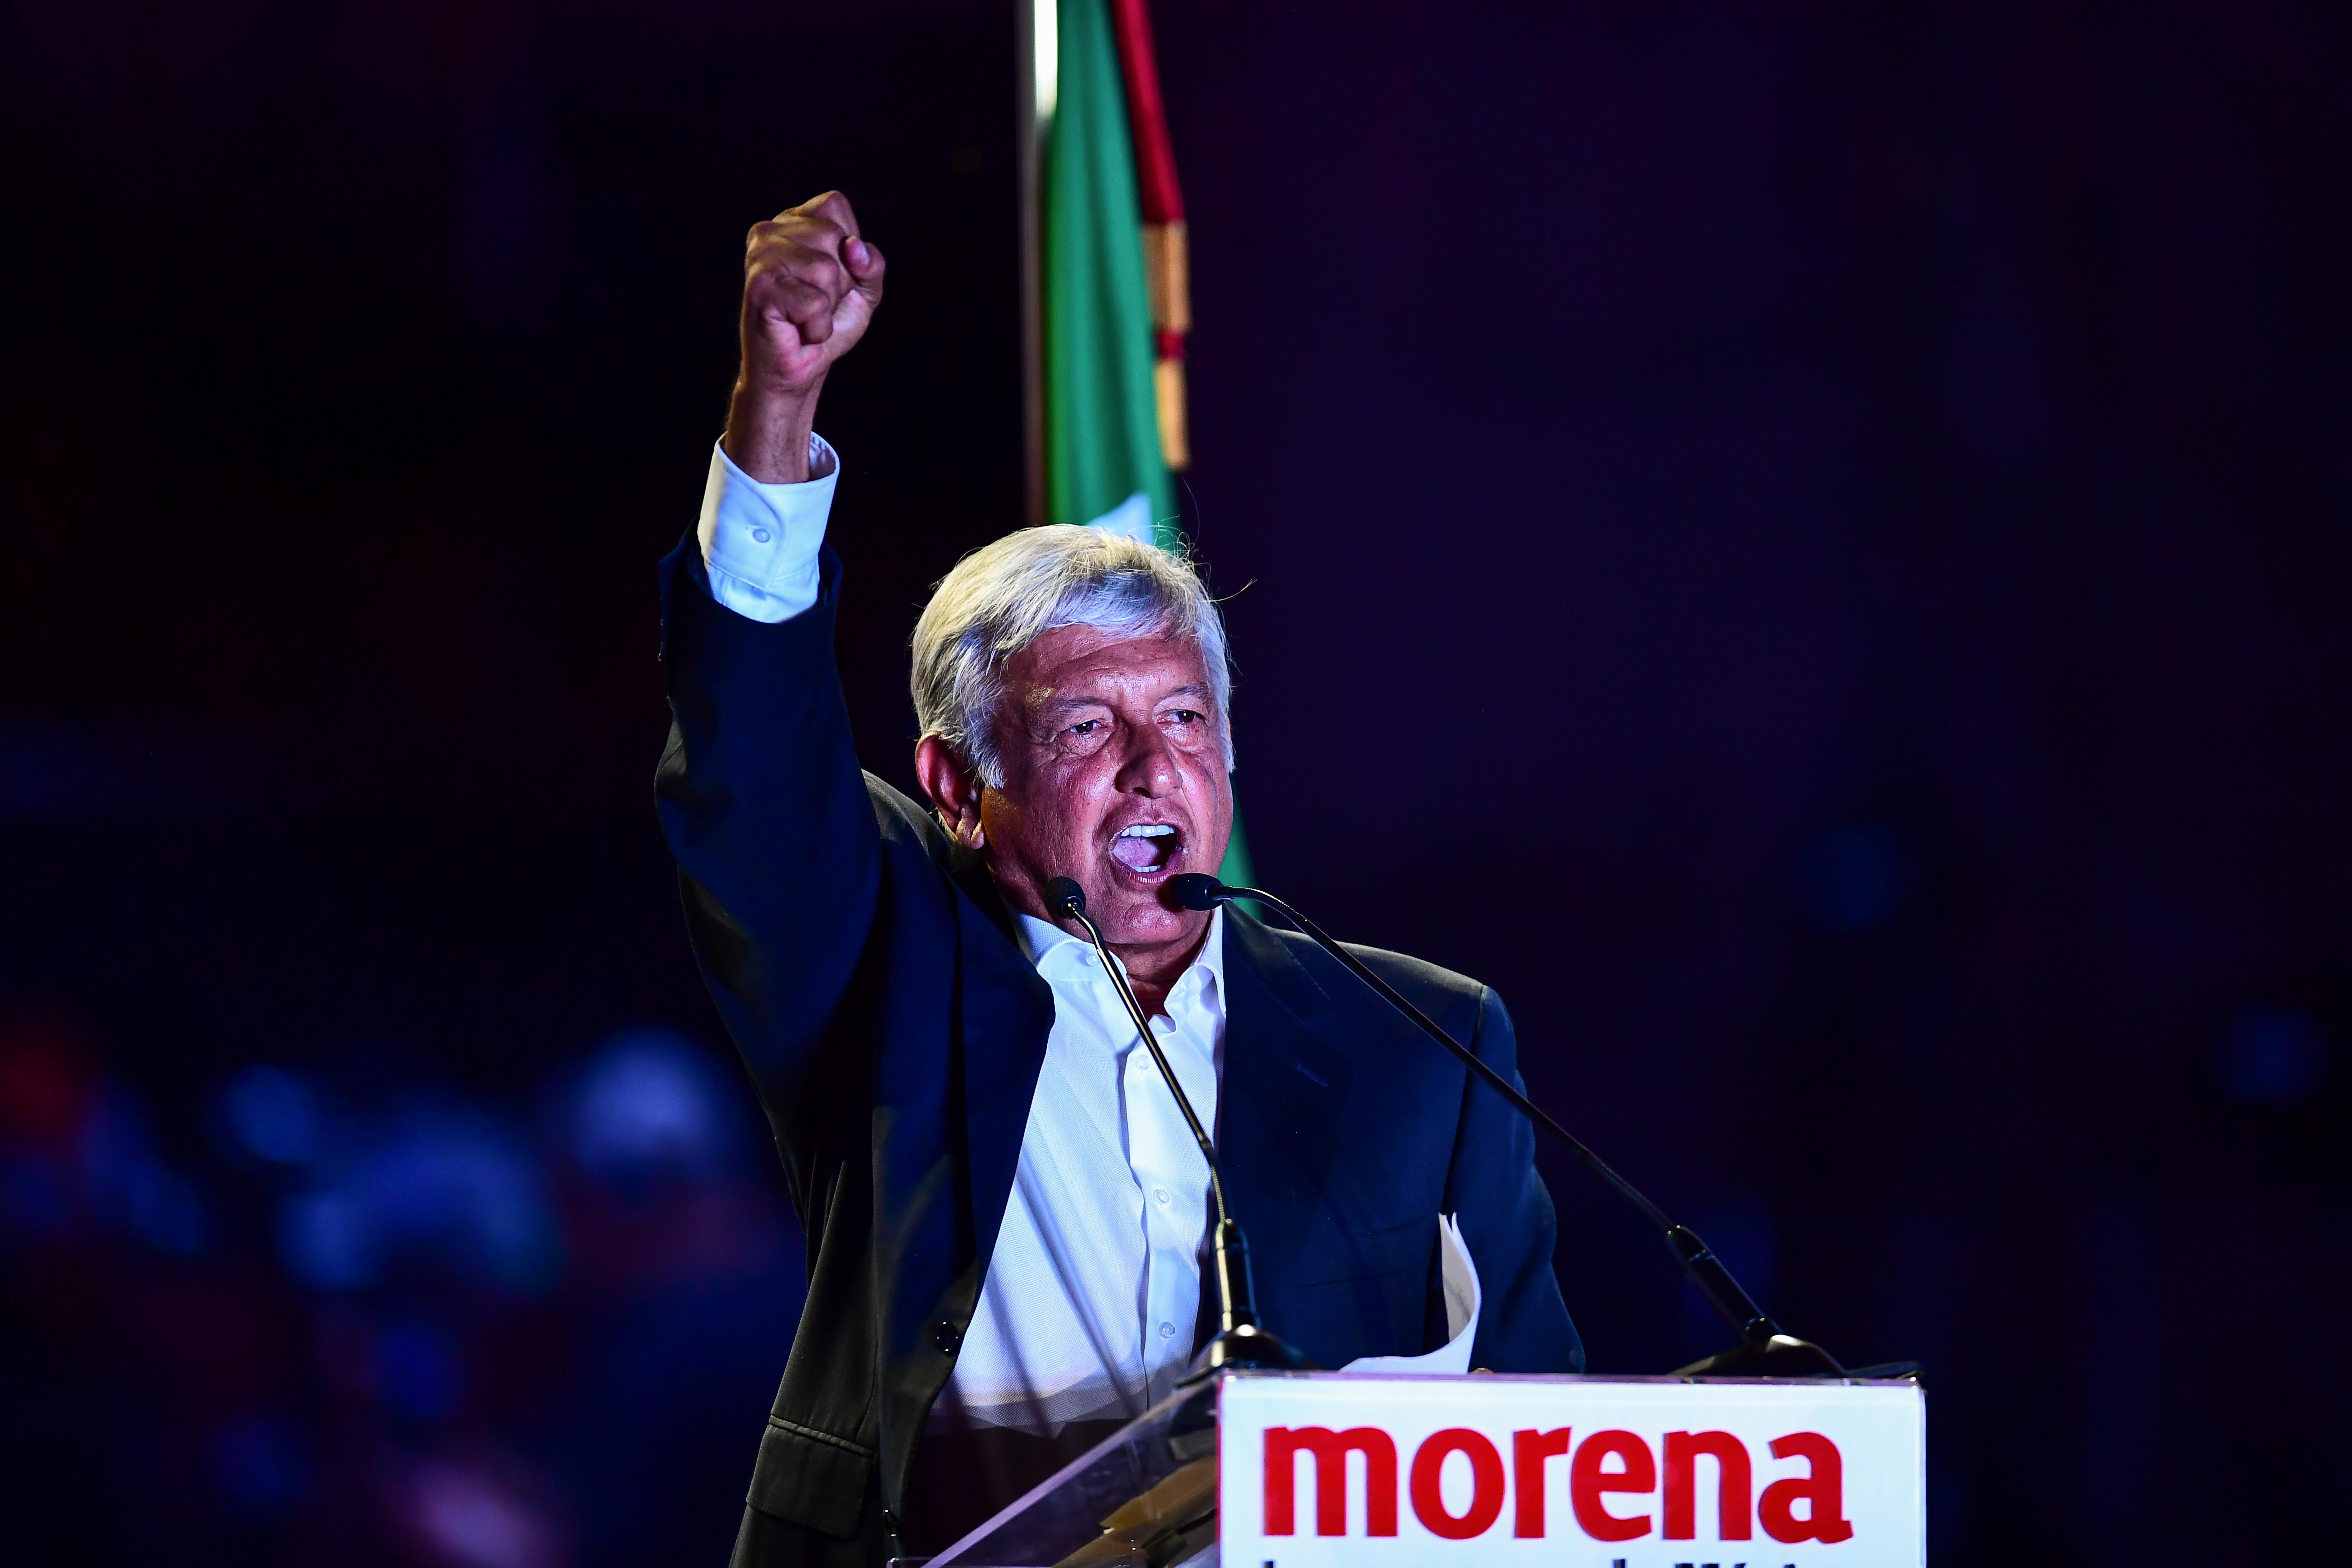 Front-runner Andres Manuel Lopez Obrador hopes to finally become Mexico’s president